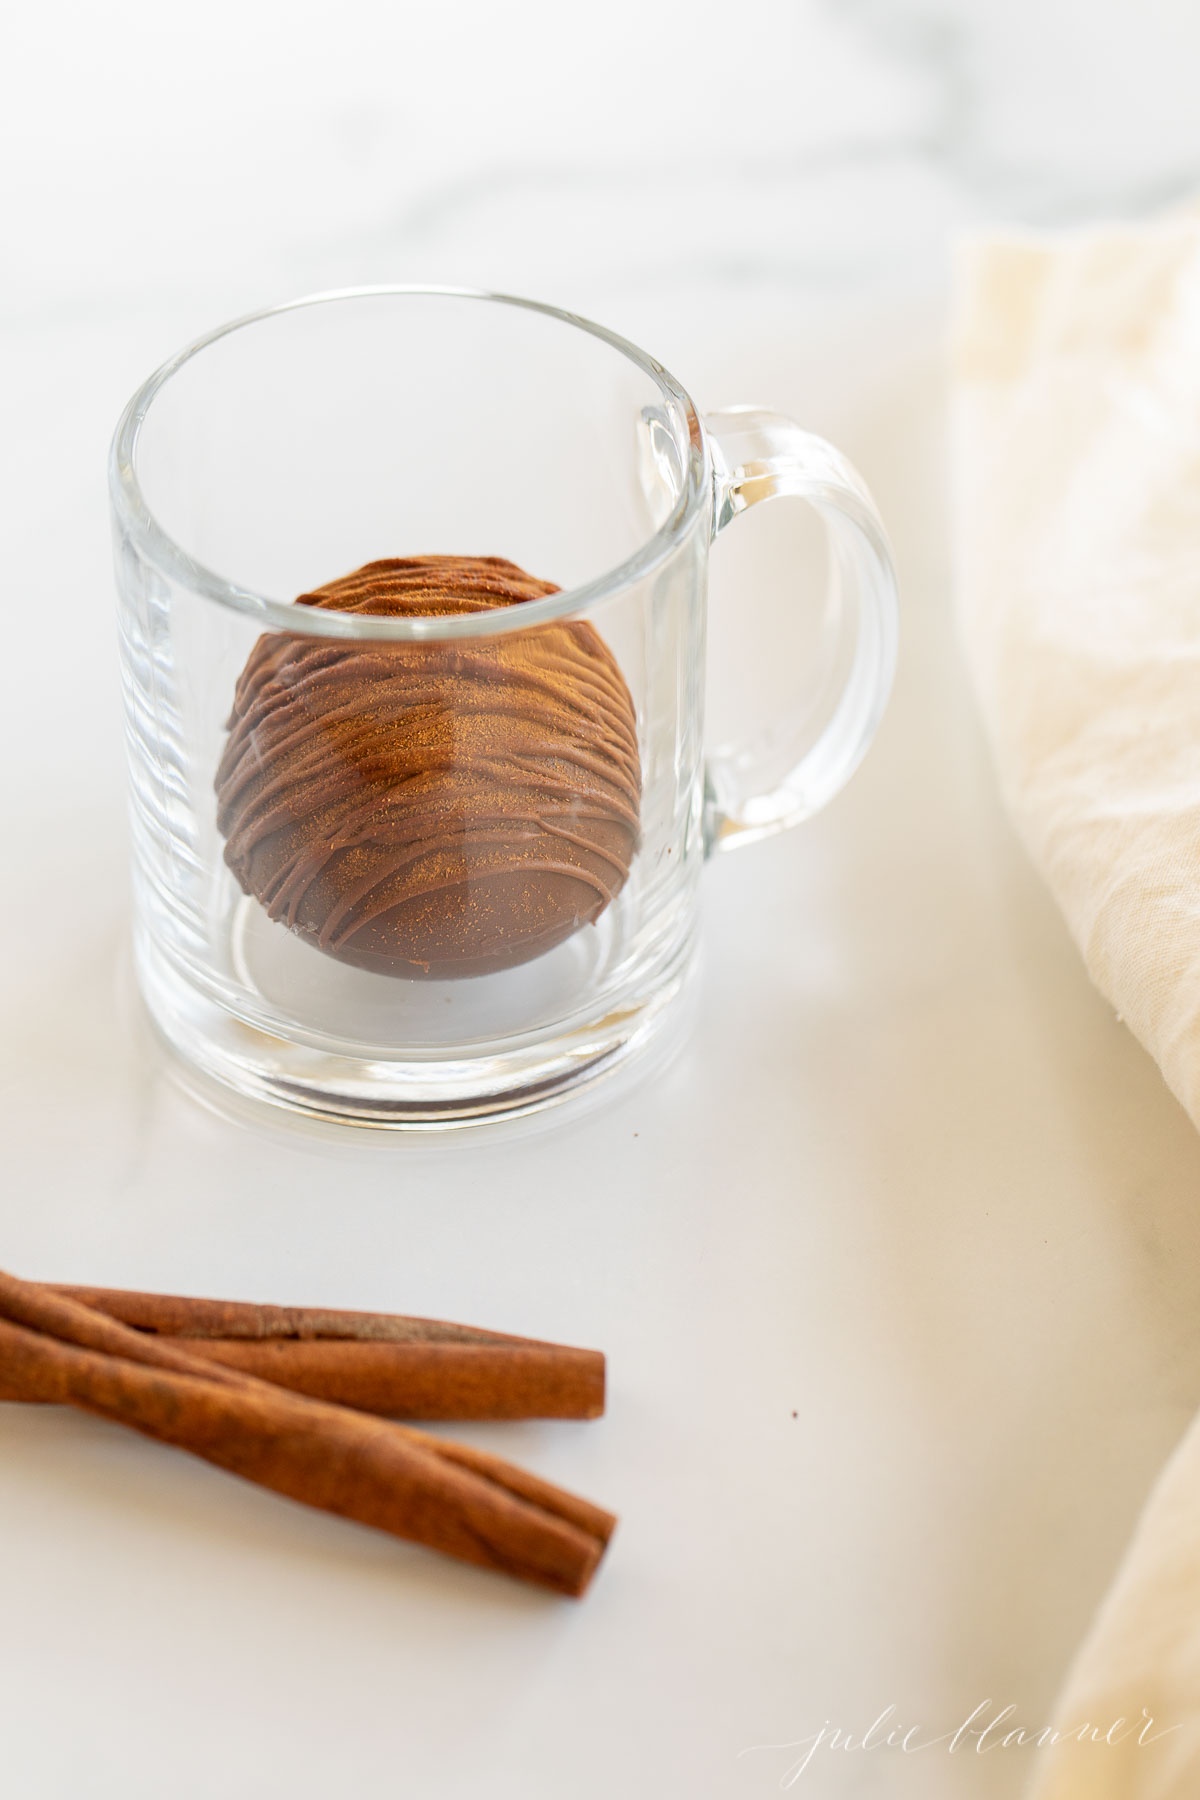 A clear mug with a Mexican hot chocolate bomb inside, cinnamon stick and white linen napkin to the side.